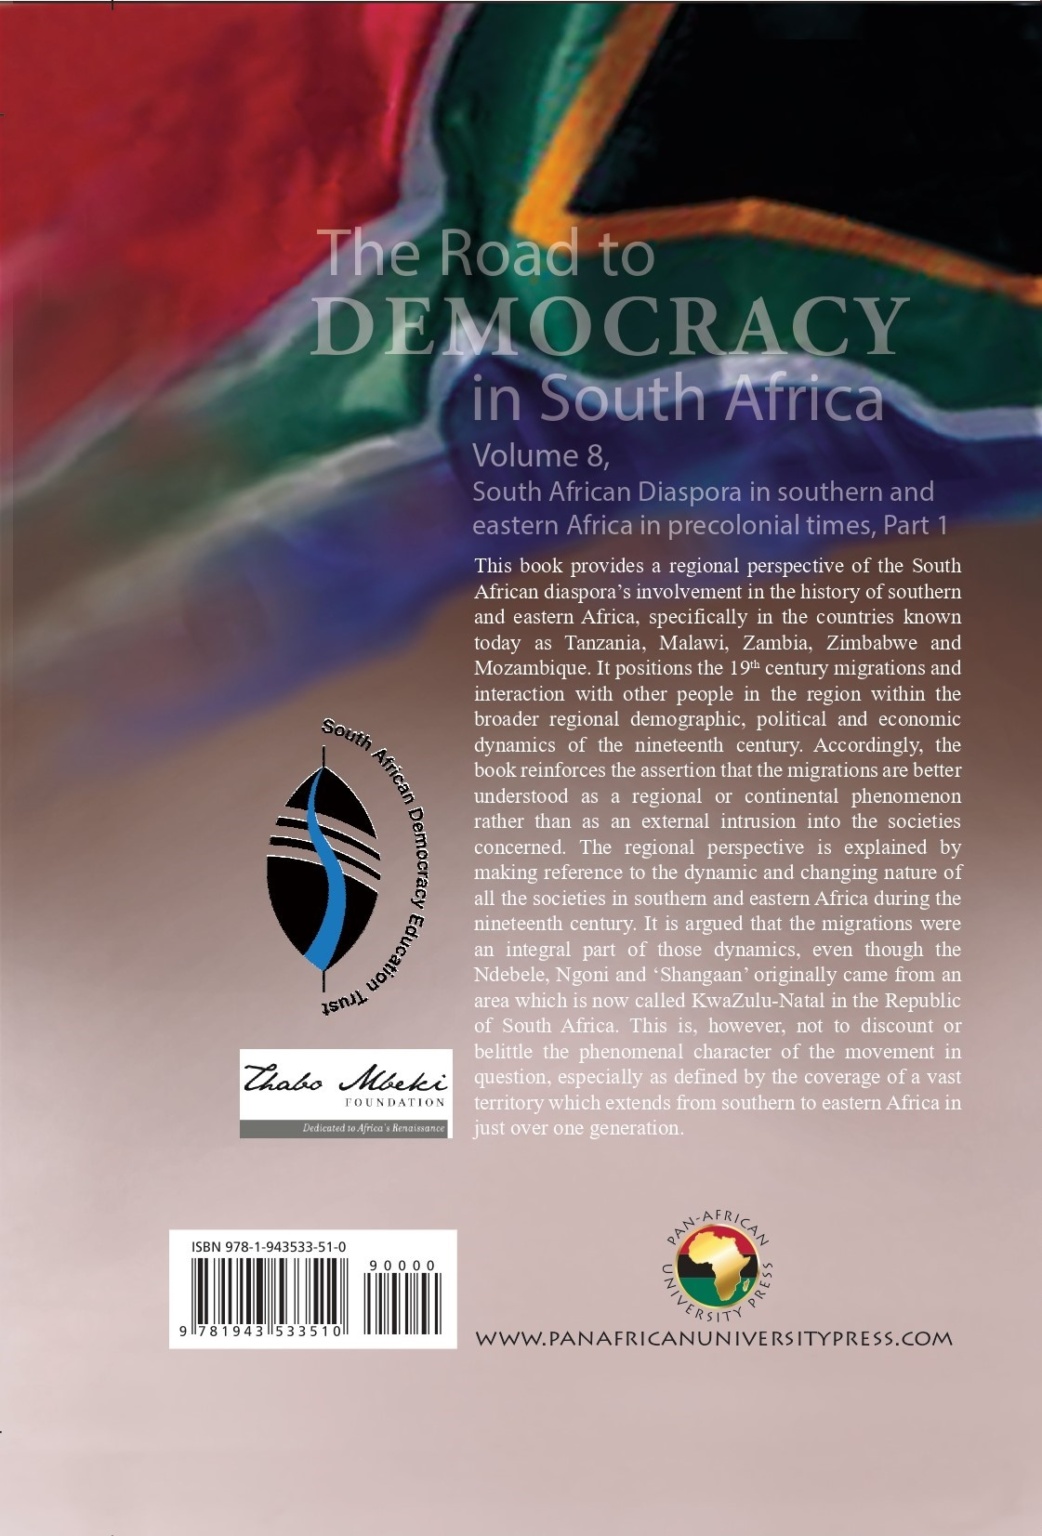 new-release-the-road-to-democracy-in-south-africa-8-1-toyin-falola